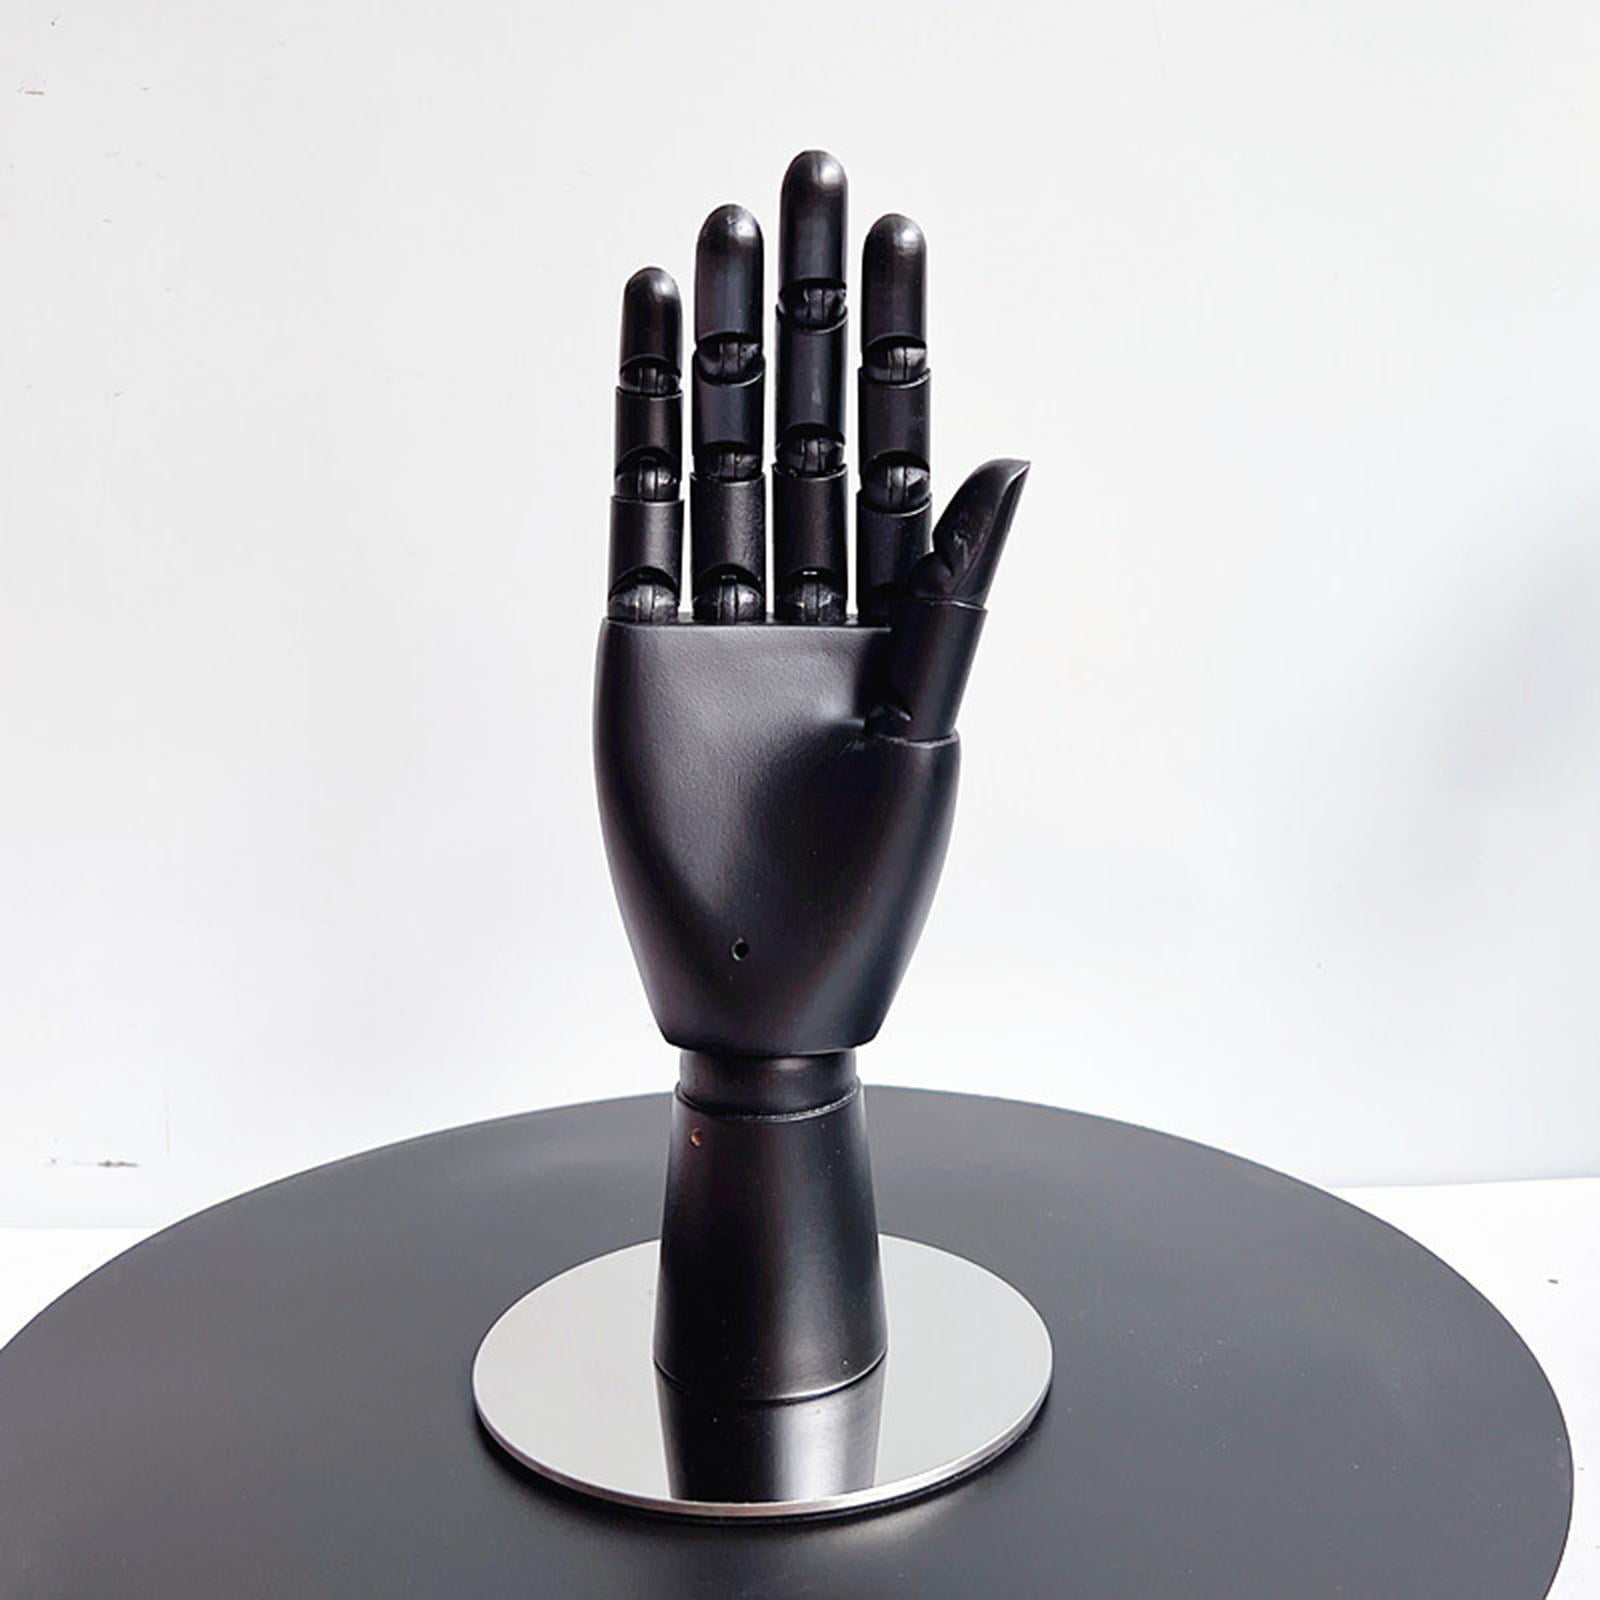 Wooden Manikin Hand with Fingers Easy to Carry Flexible Decorative 10 Art  Mannequin Hand for Sketching Art Supplies Desk Decoration Black 